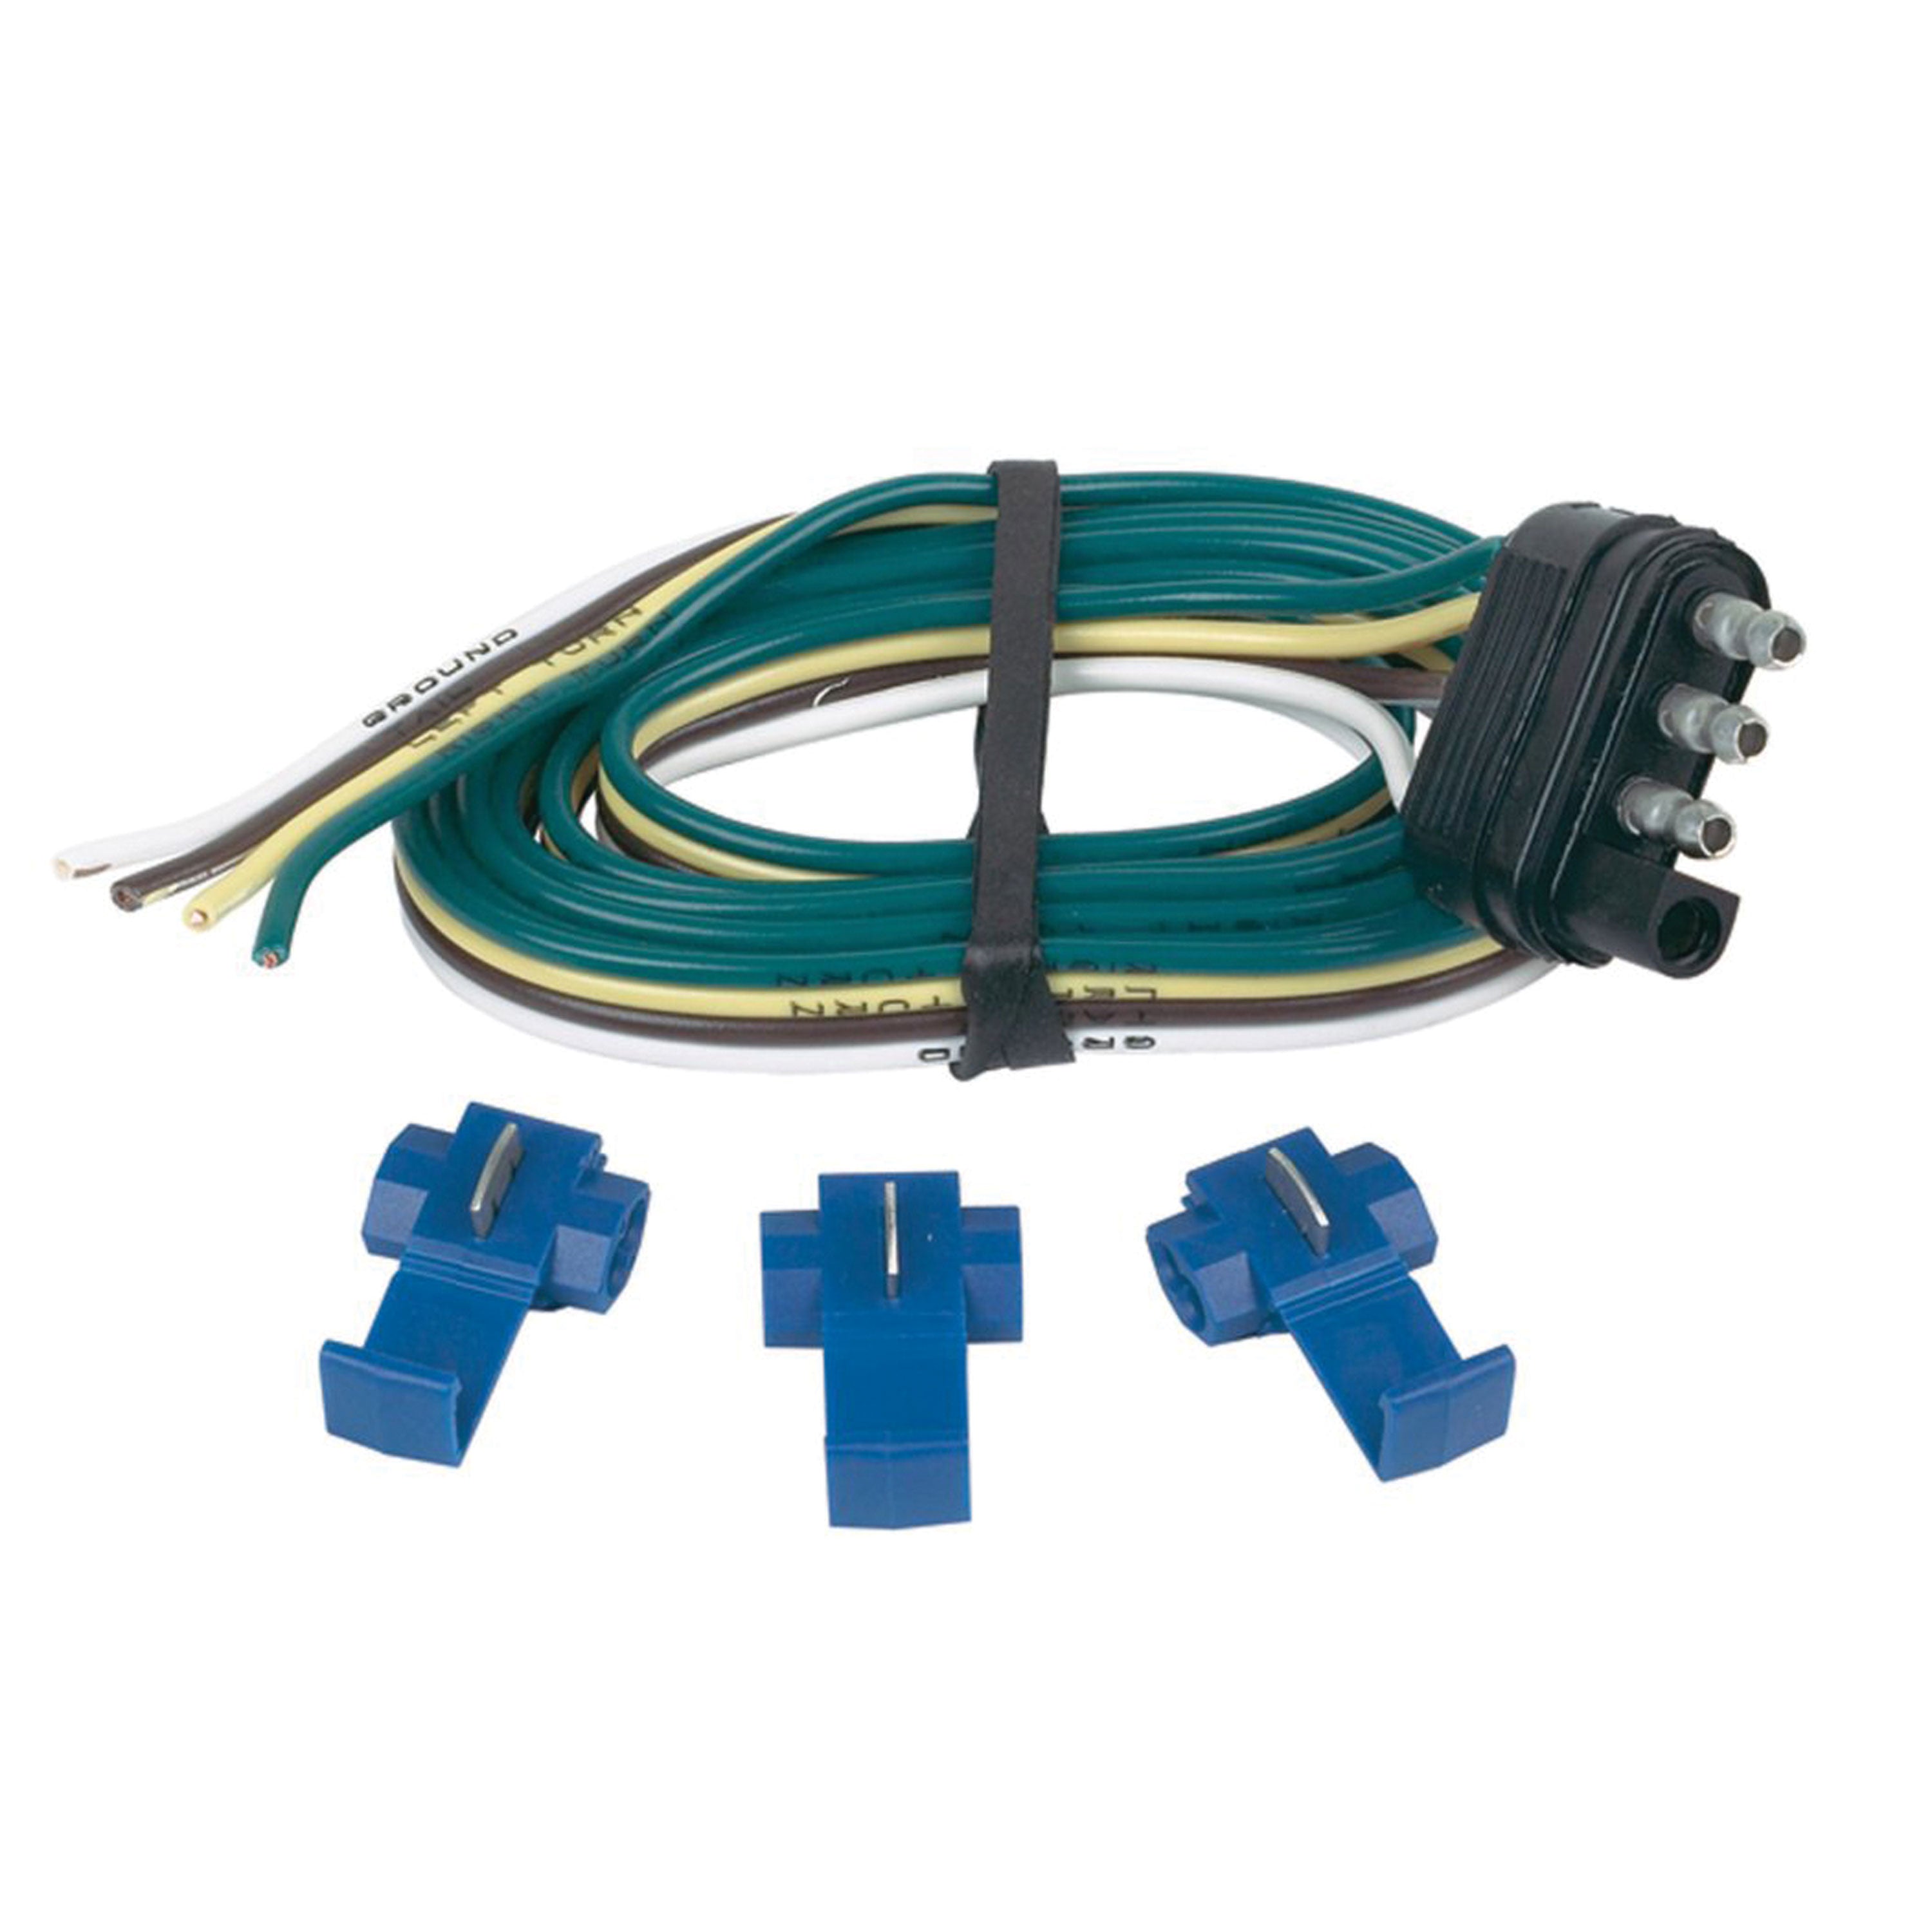 Hopkins 48125 4-Wire Flat Trailer End Kit - 48" Wires